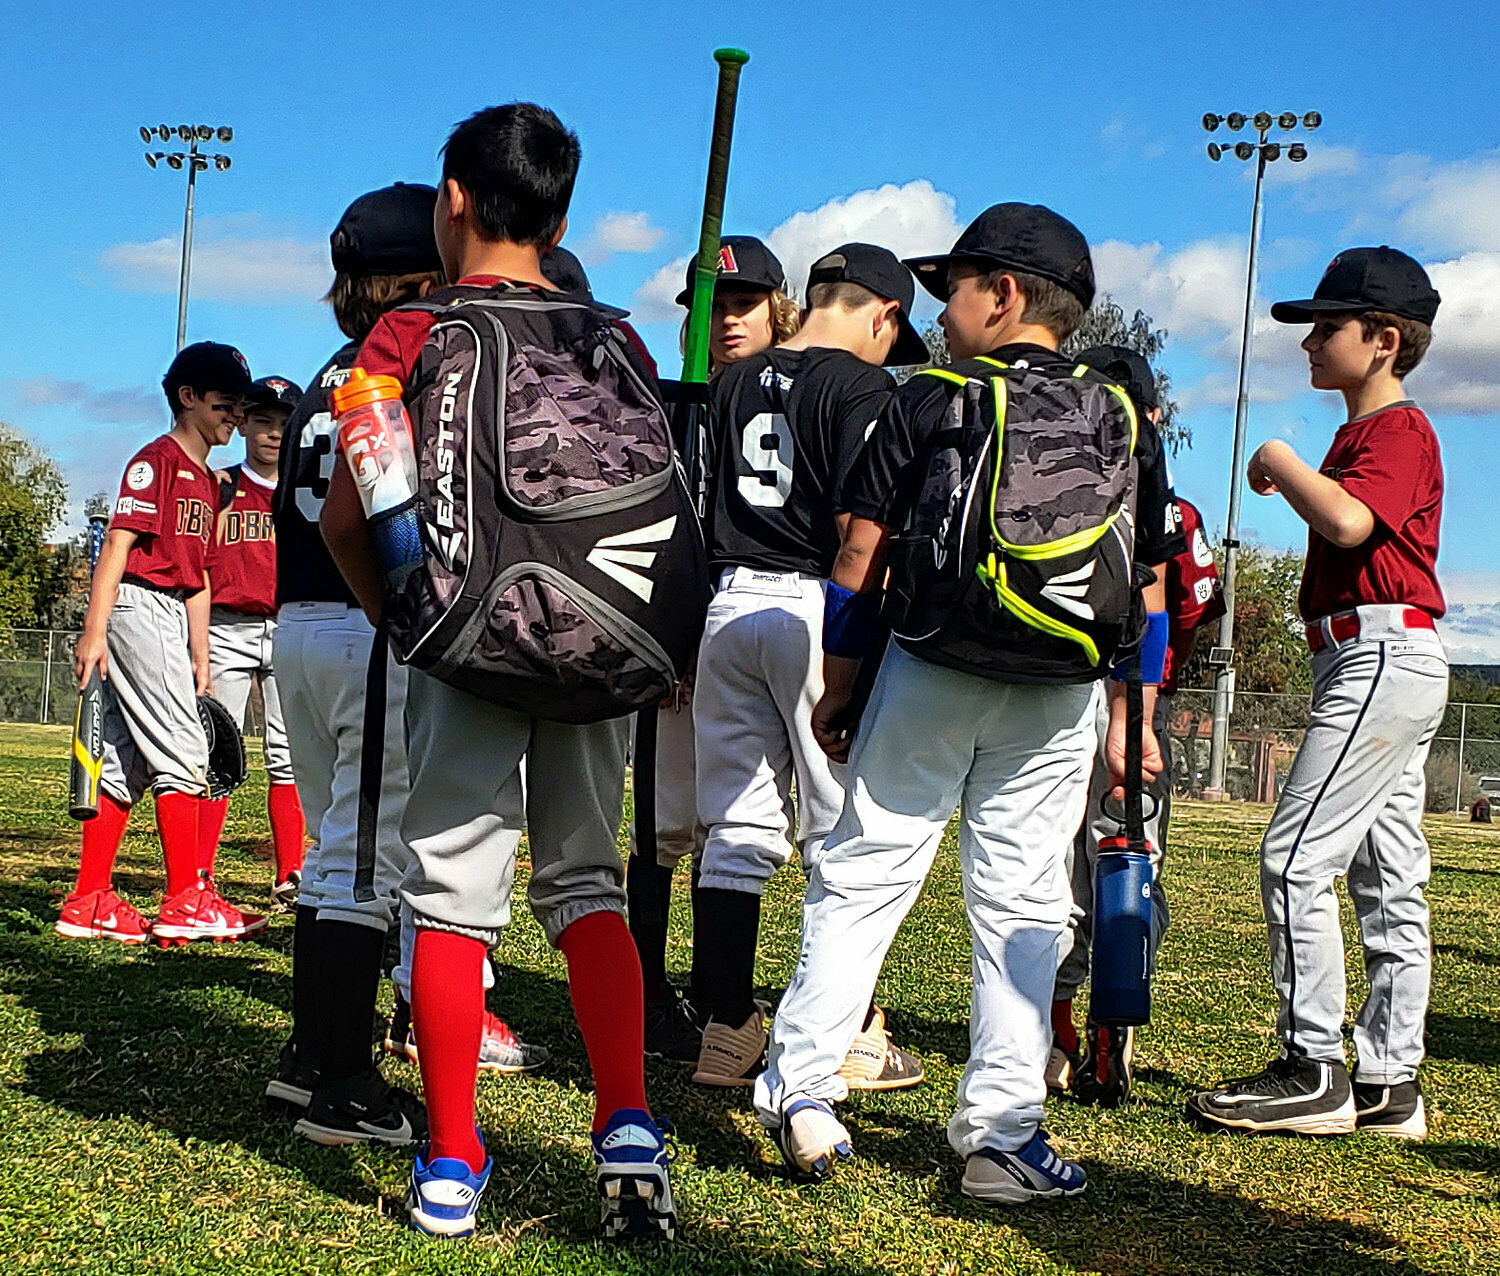 Players gather during a past Arrowhead Little League spring season opening day in Glendale.